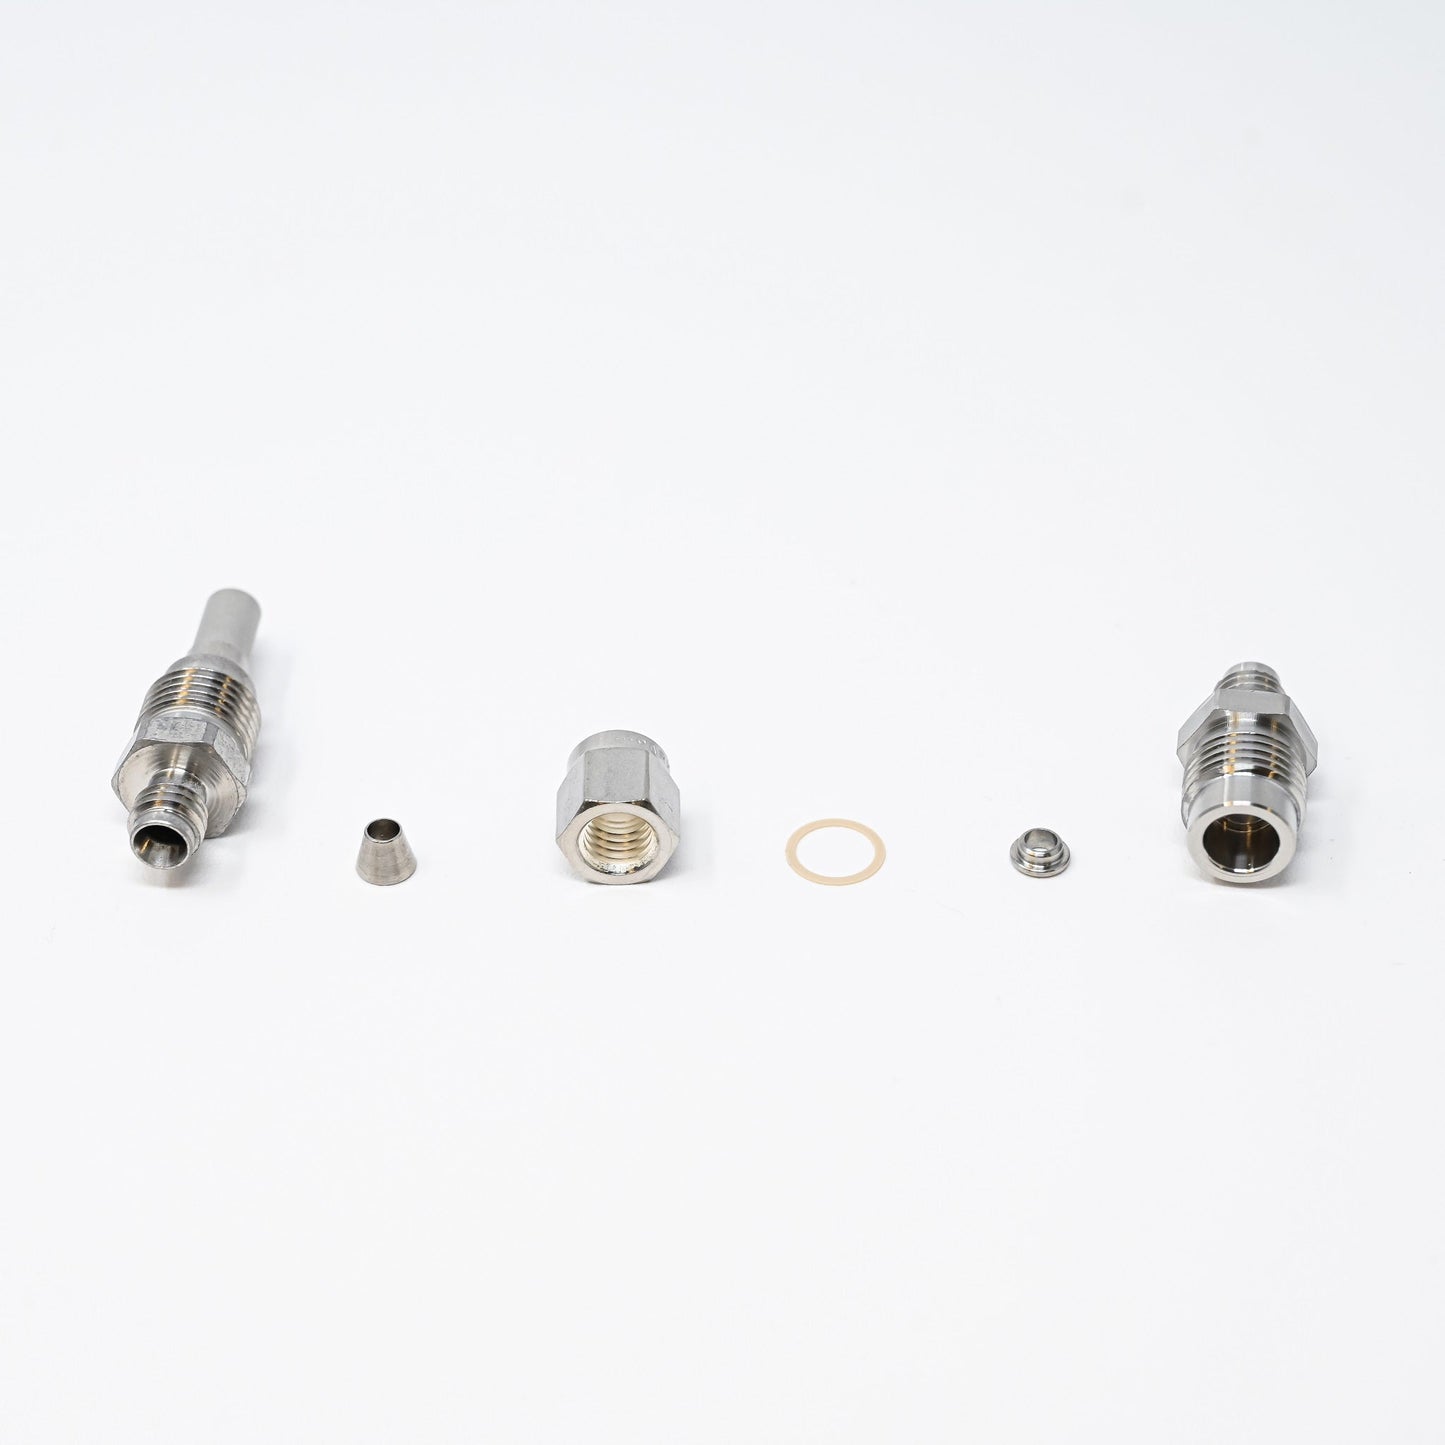 Collection of parts for fittings adapter kit.